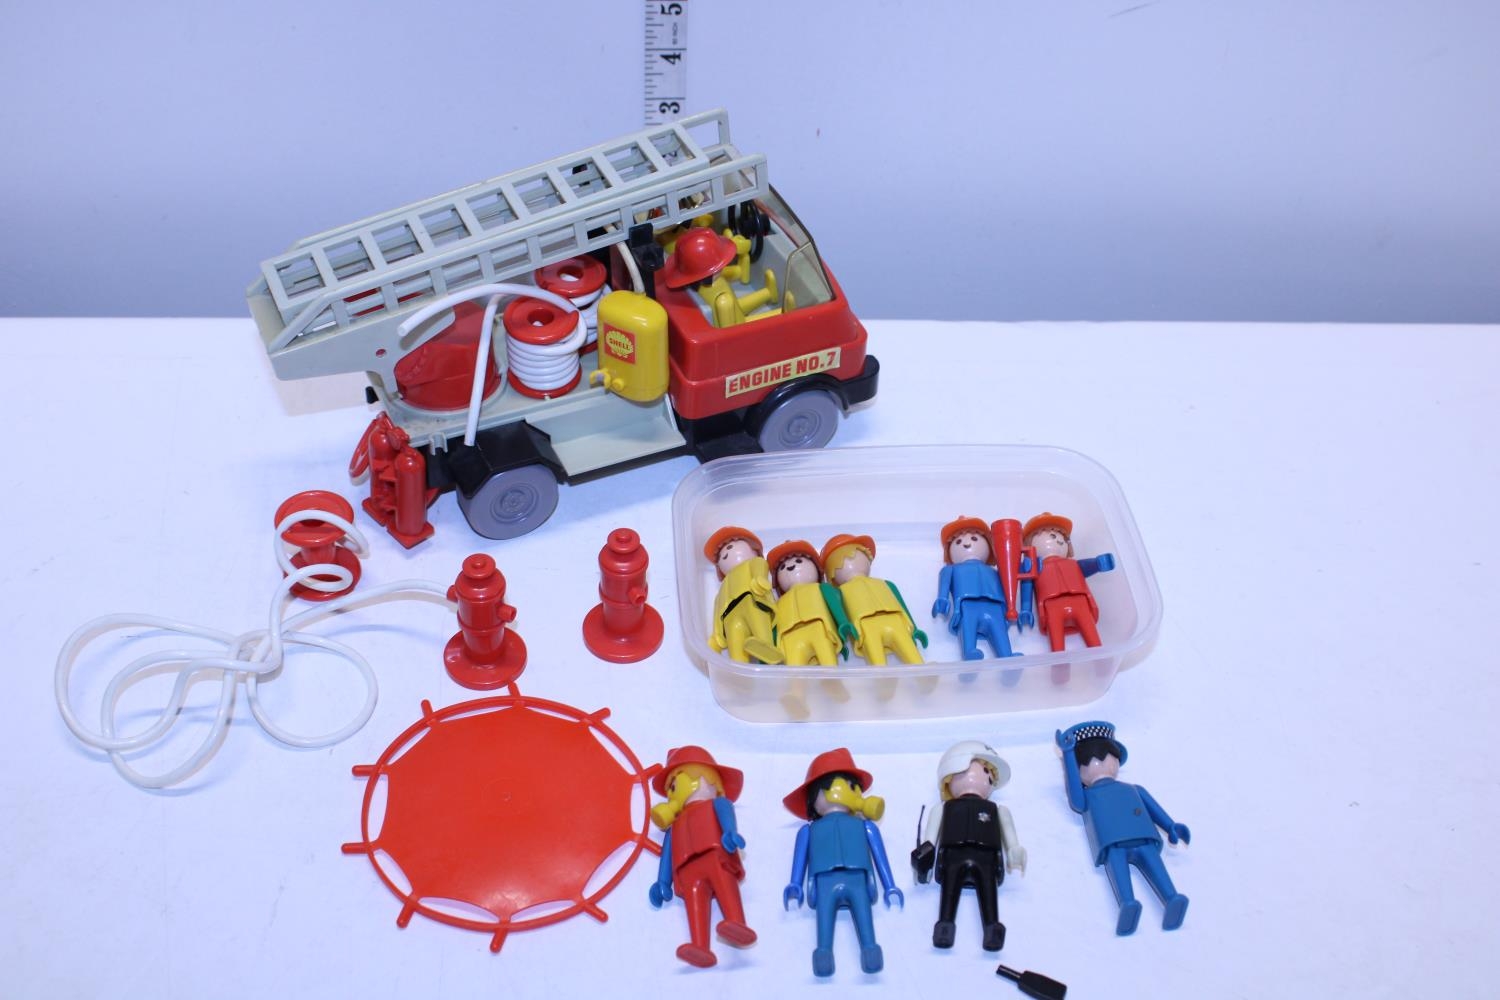 A vintage Playmobil figure engine and figures